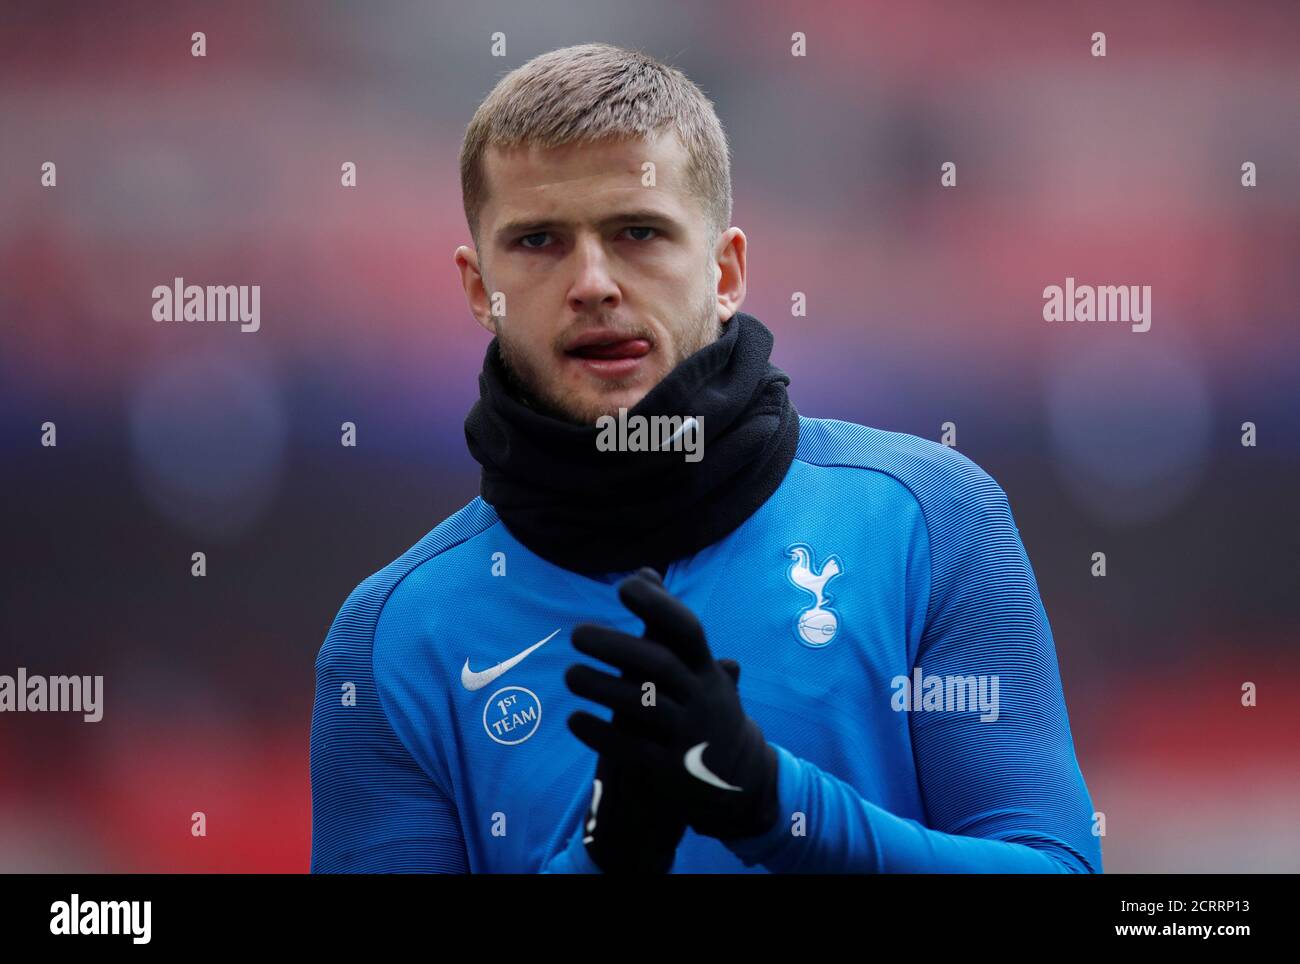 Soccer Football - Premier League - Tottenham Hotspur vs Huddersfield Town - Wembley Stadium, London, Britain - March 3, 2018   Tottenham's Eric Dier during the warm up before the match    REUTERS/Eddie Keogh    EDITORIAL USE ONLY. No use with unauthorized audio, video, data, fixture lists, club/league logos or 'live' services. Online in-match use limited to 75 images, no video emulation. No use in betting, games or single club/league/player publications.  Please contact your account representative for further details. Stock Photo